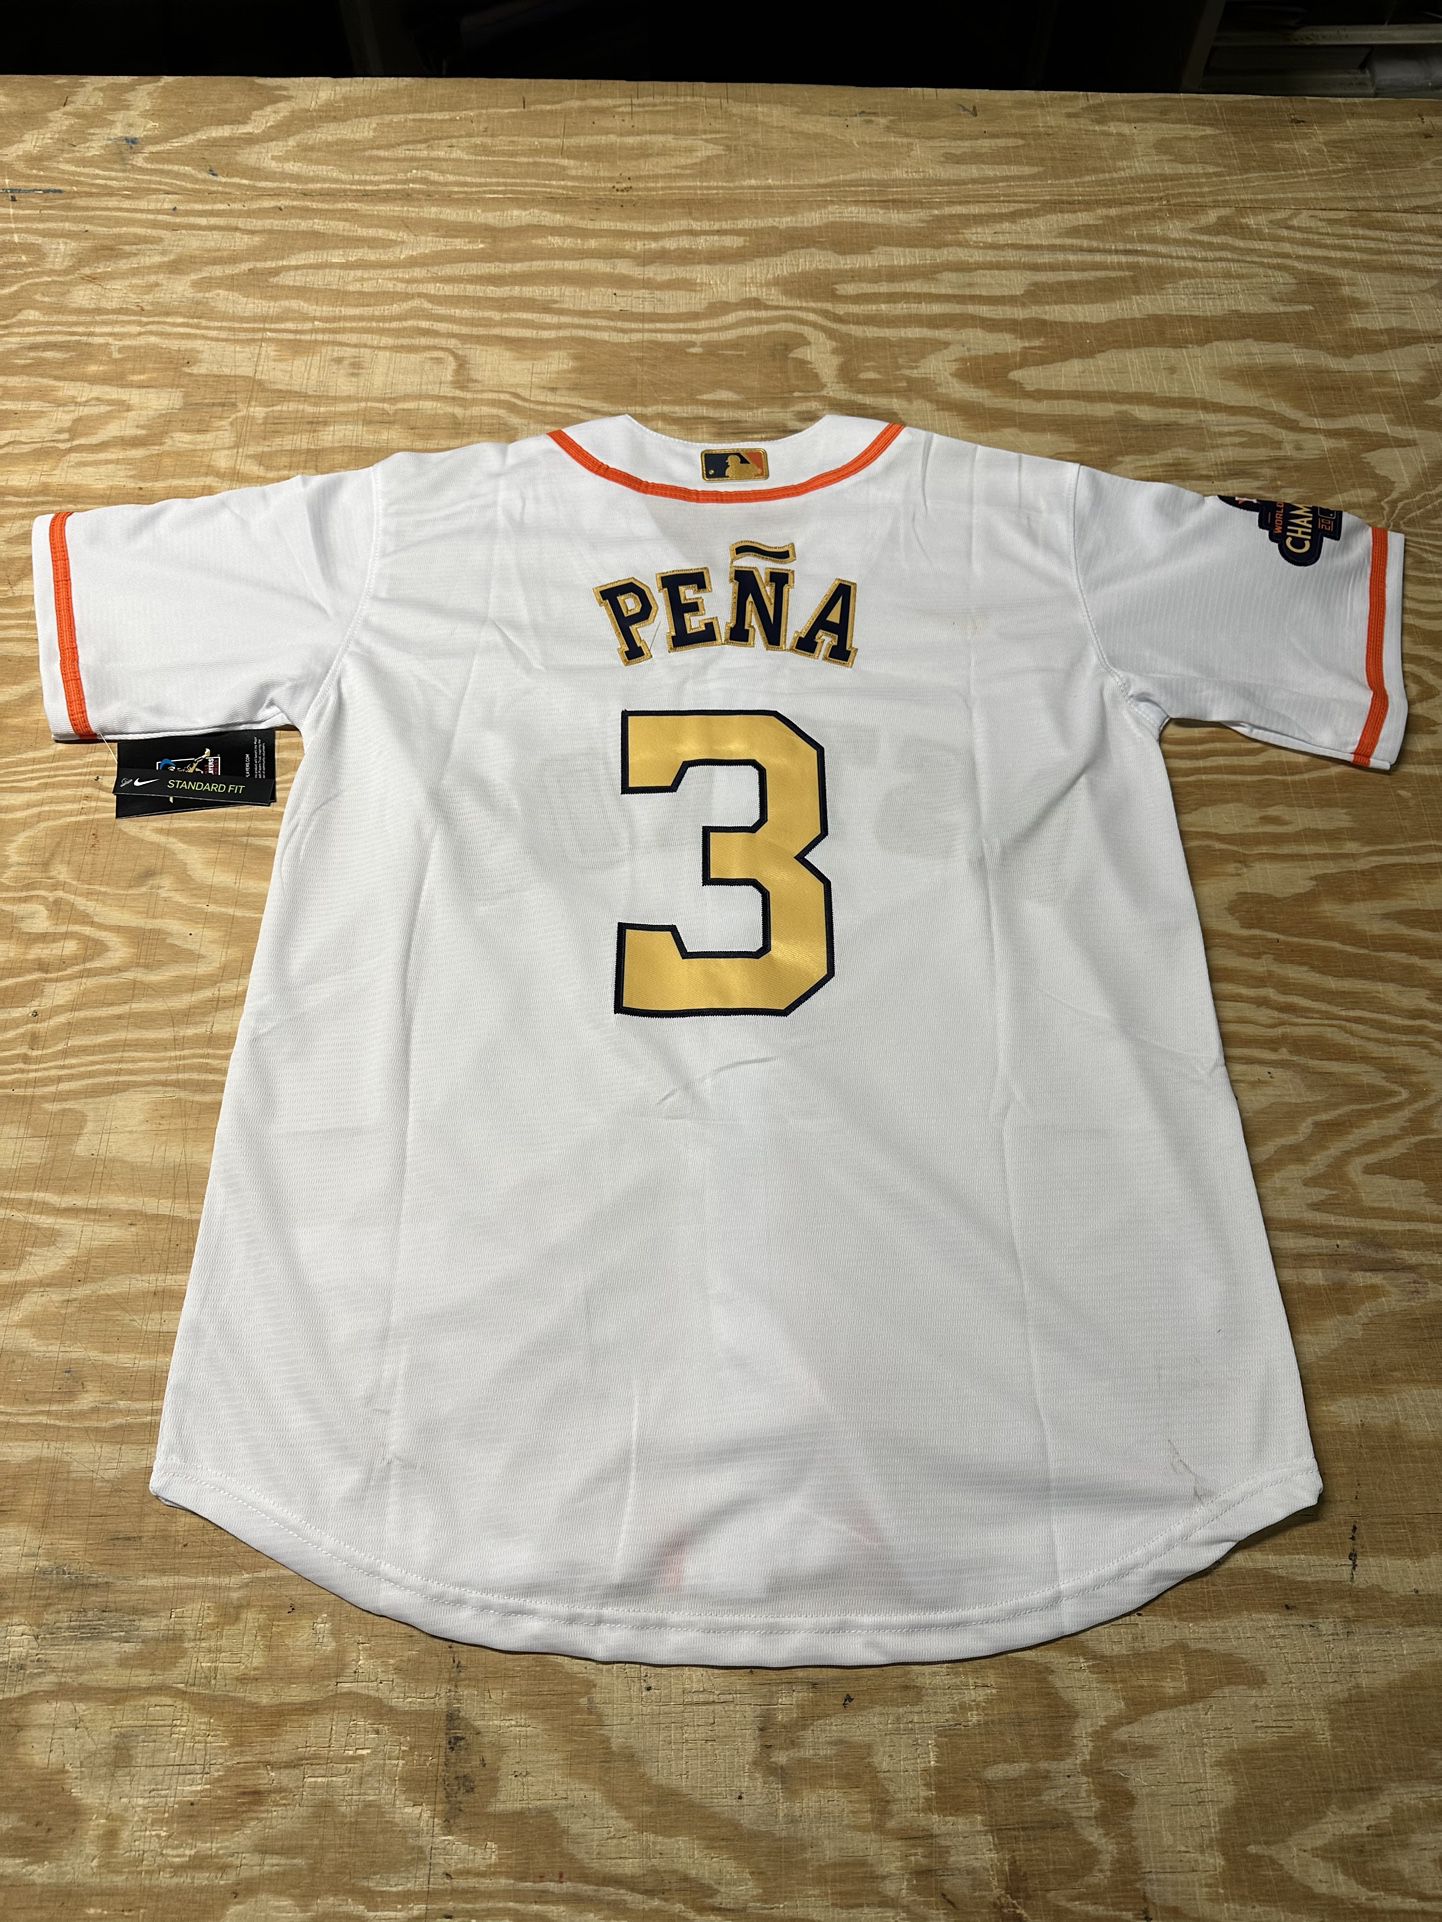 Houston Astros Jersey for Sale in Houston, TX - OfferUp